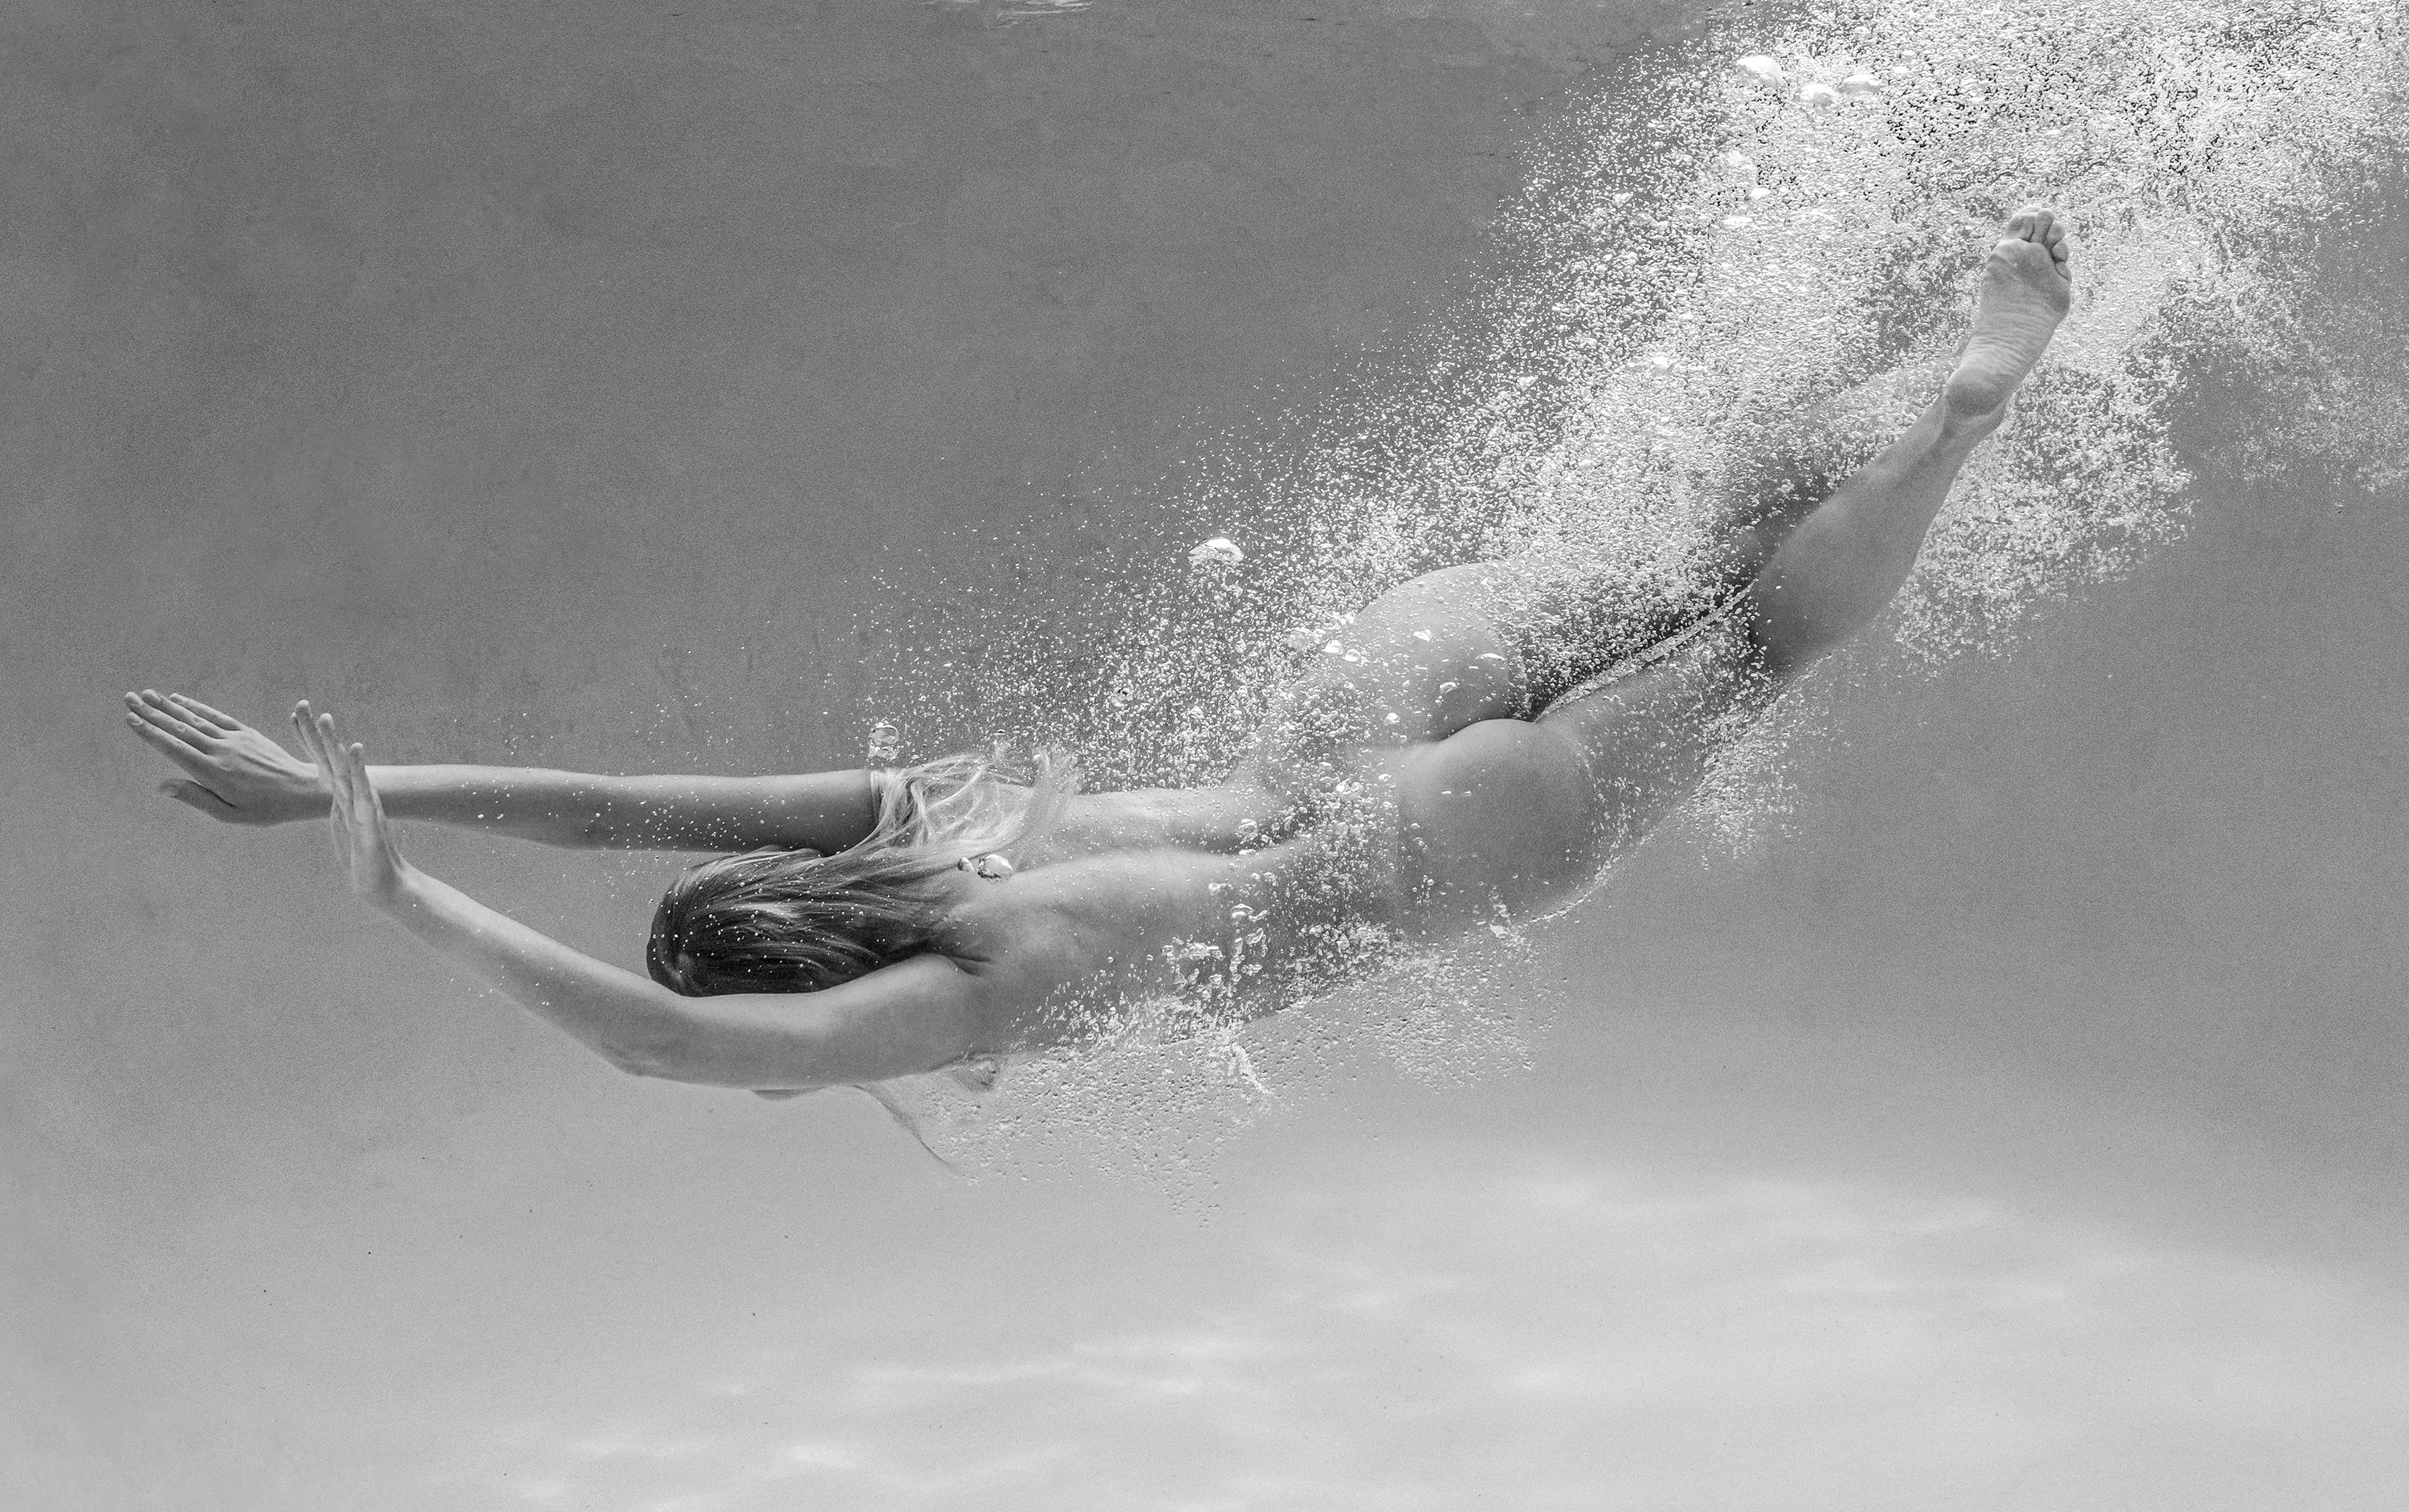 Under - underwater black & white nude photograph - archival pigment print 24x35 - Photograph by Alex Sher